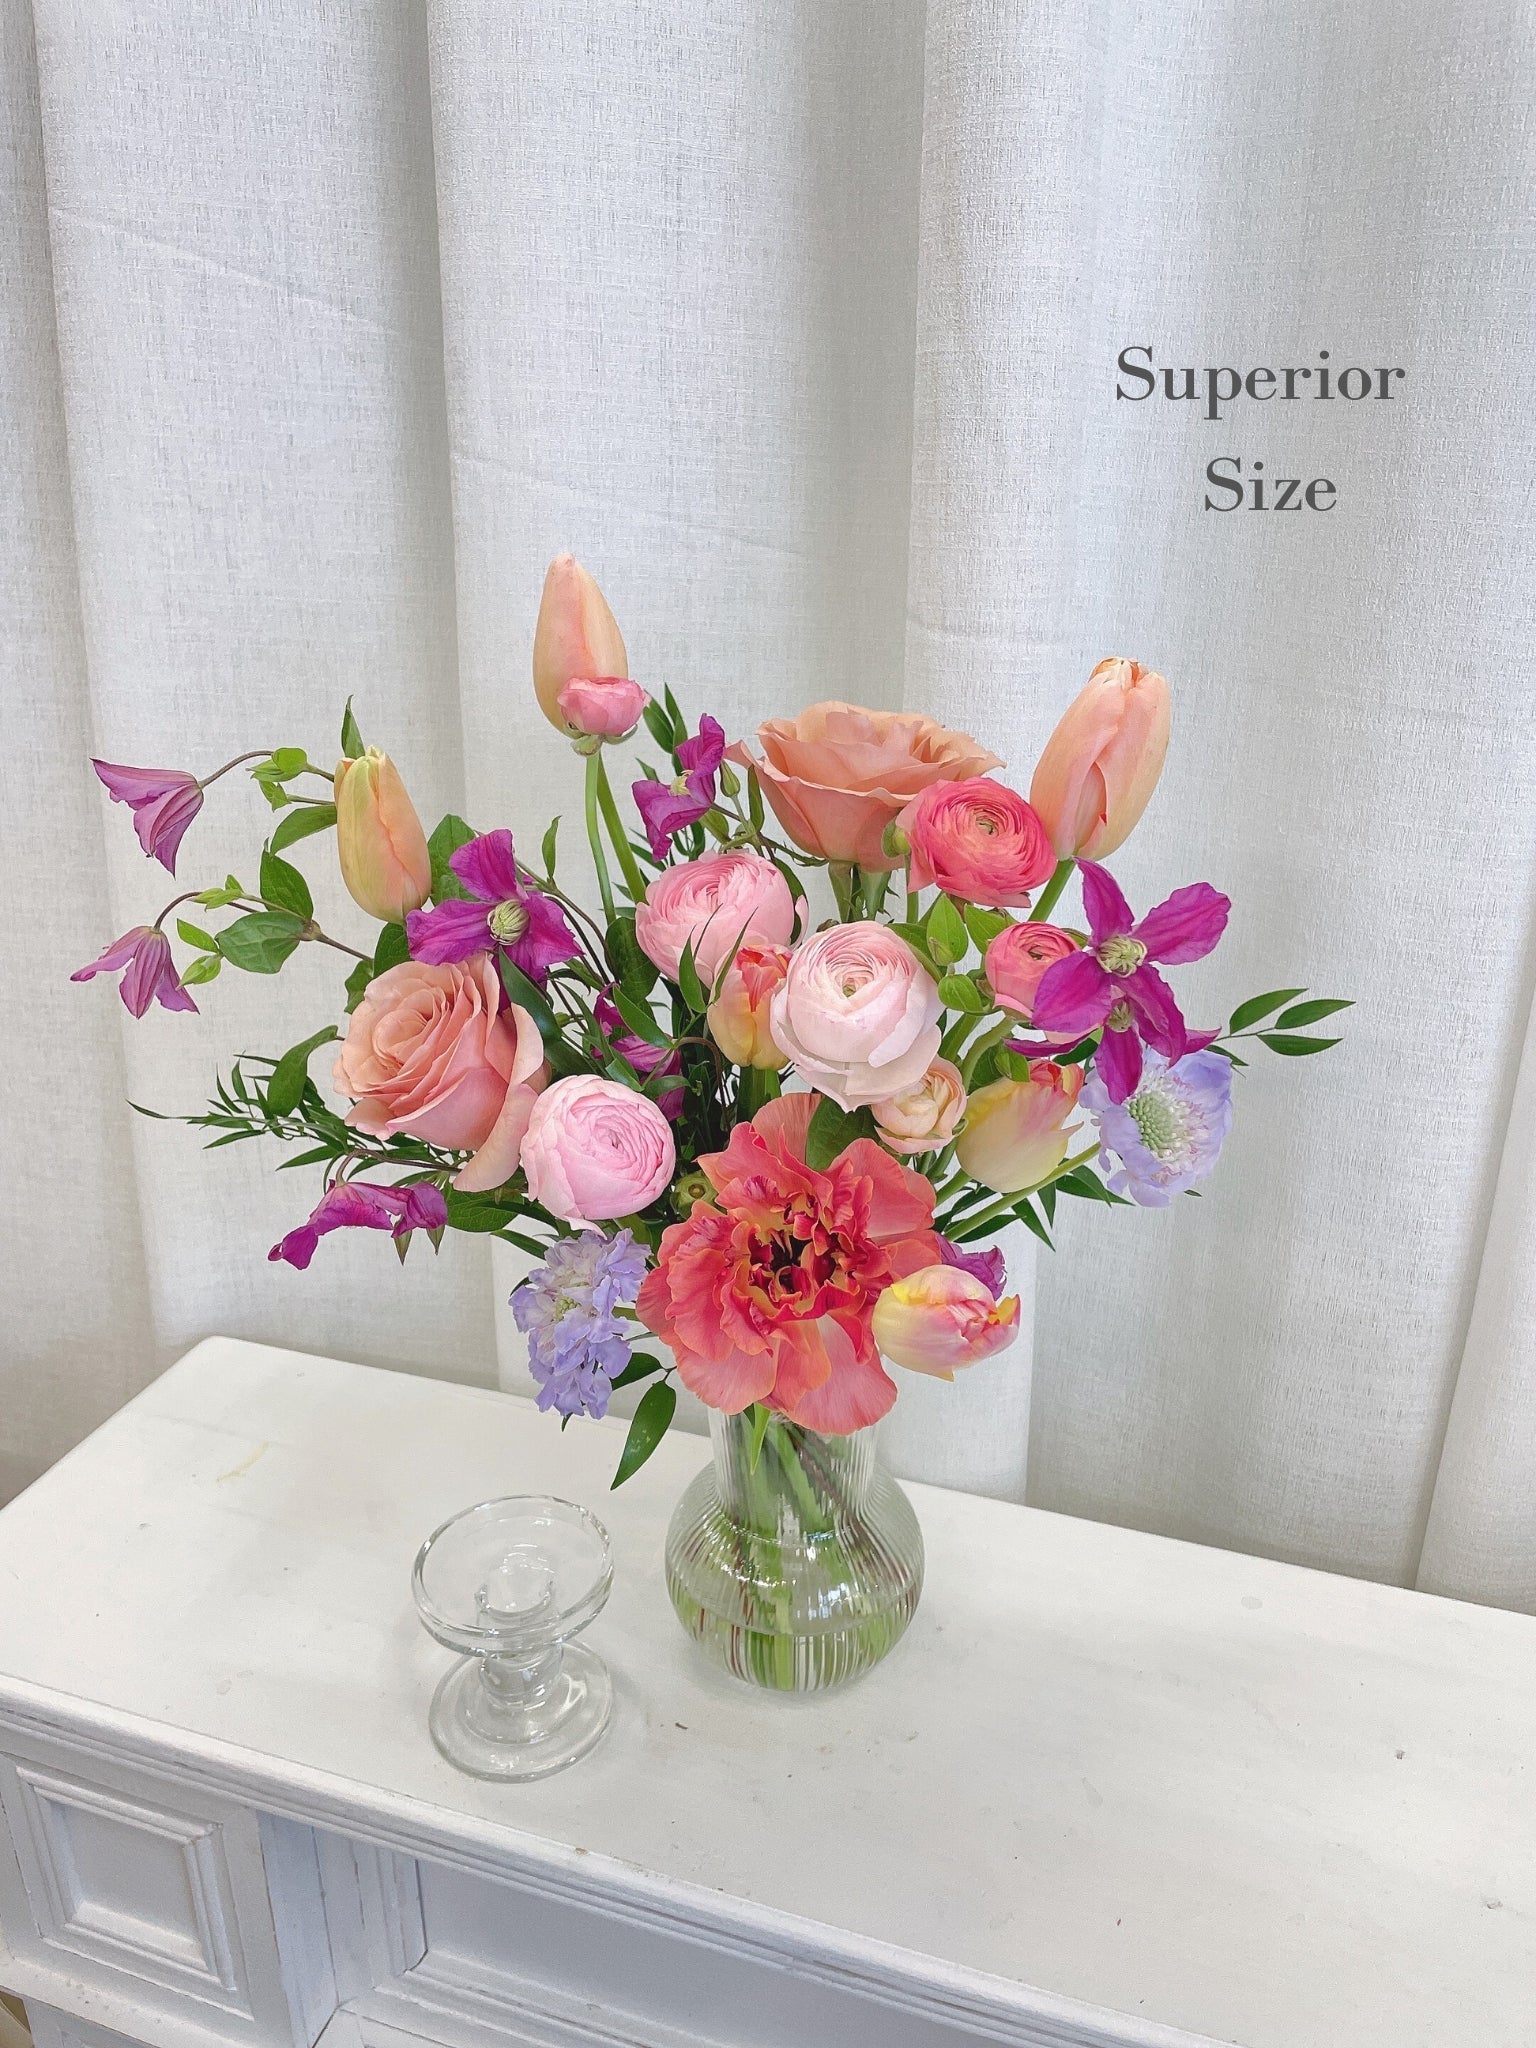 Weekly Flower Subscription - Standard - - Subscription - - 3